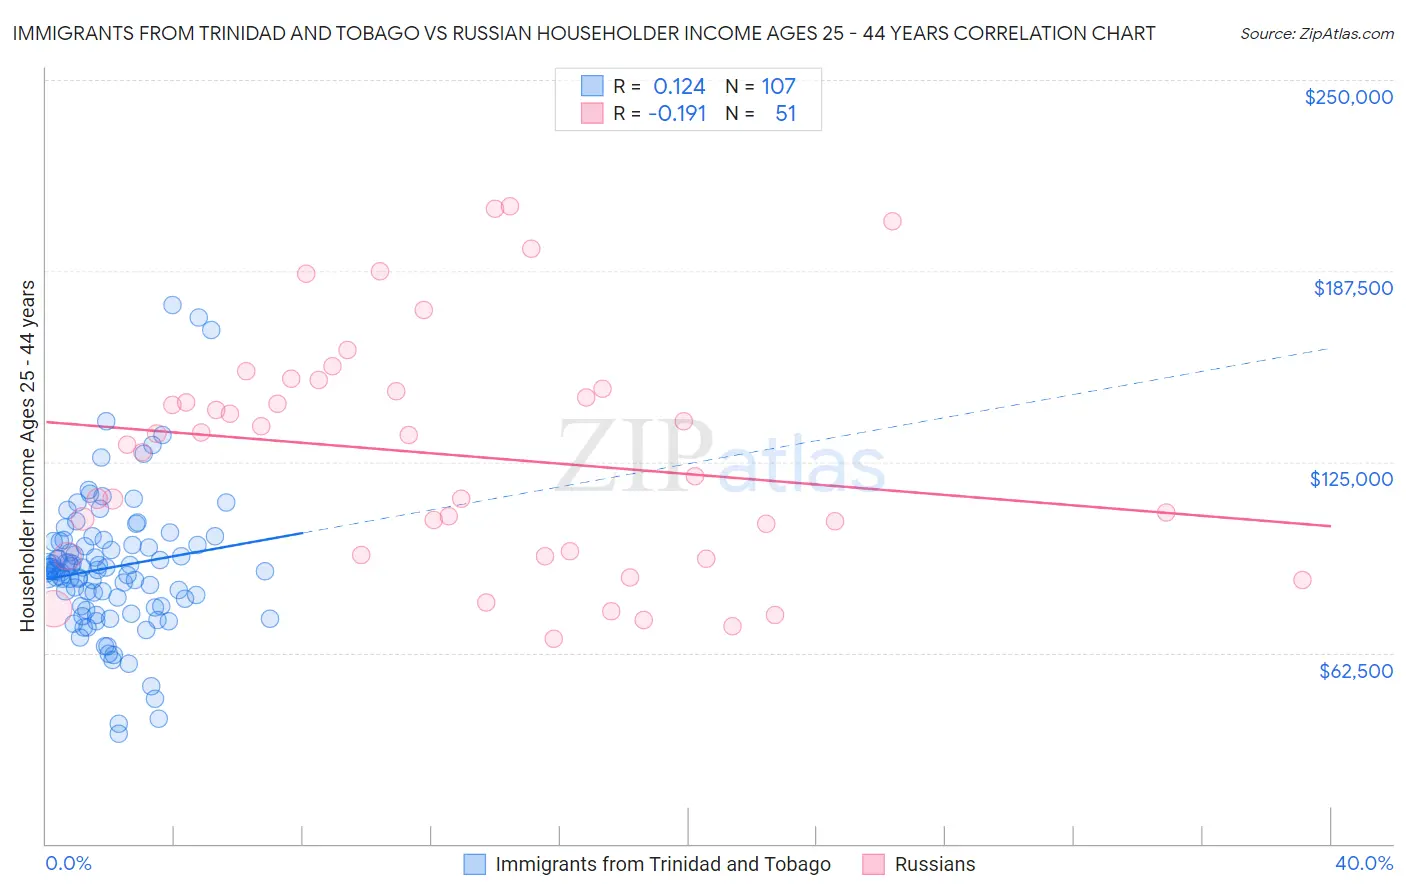 Immigrants from Trinidad and Tobago vs Russian Householder Income Ages 25 - 44 years